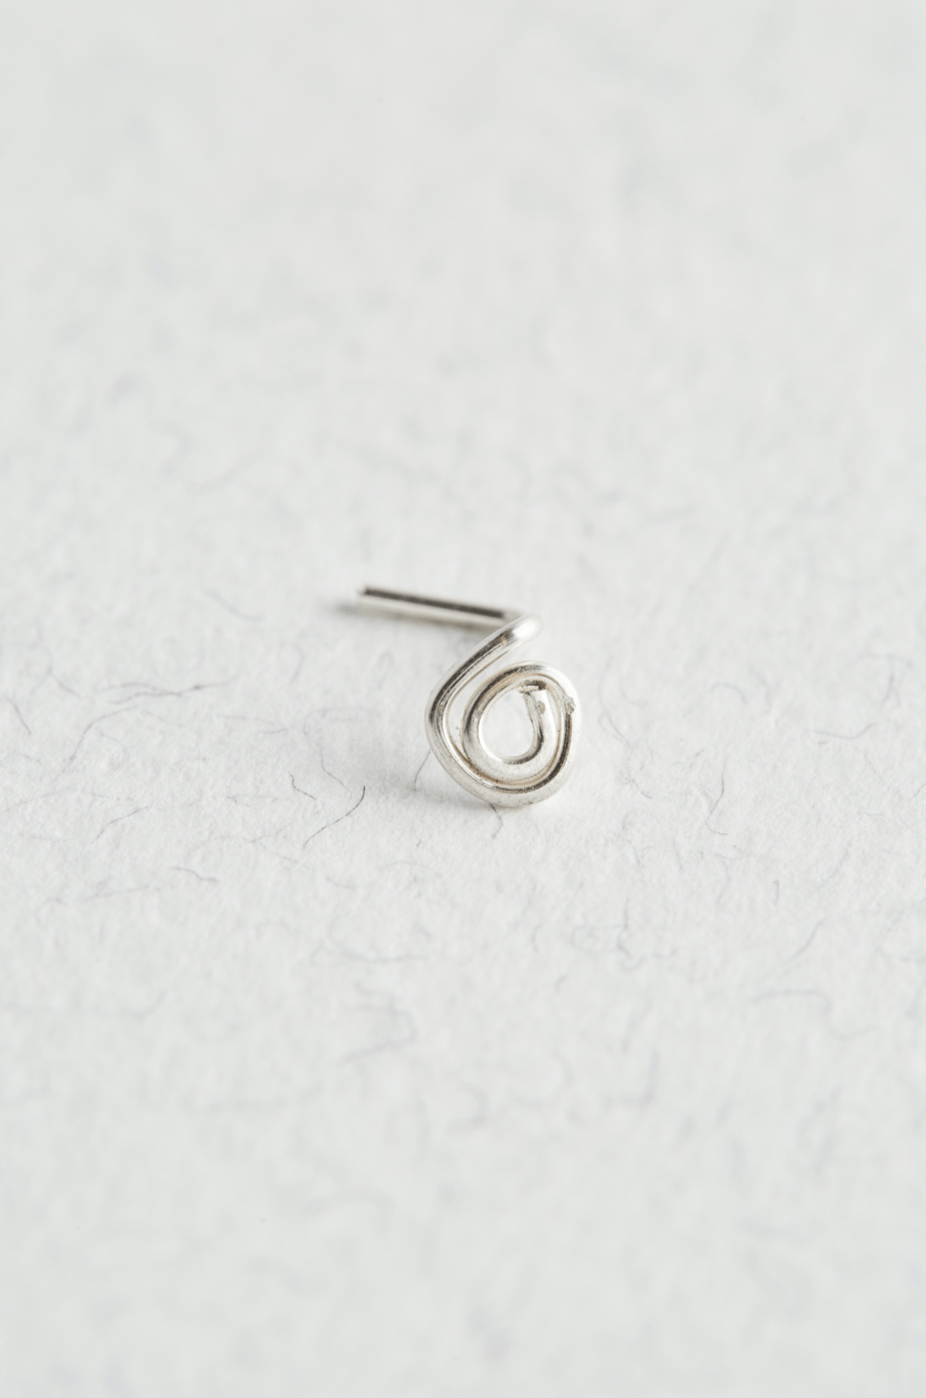 Sterling Silver Spiral Nose Stud - Jewellery Hut